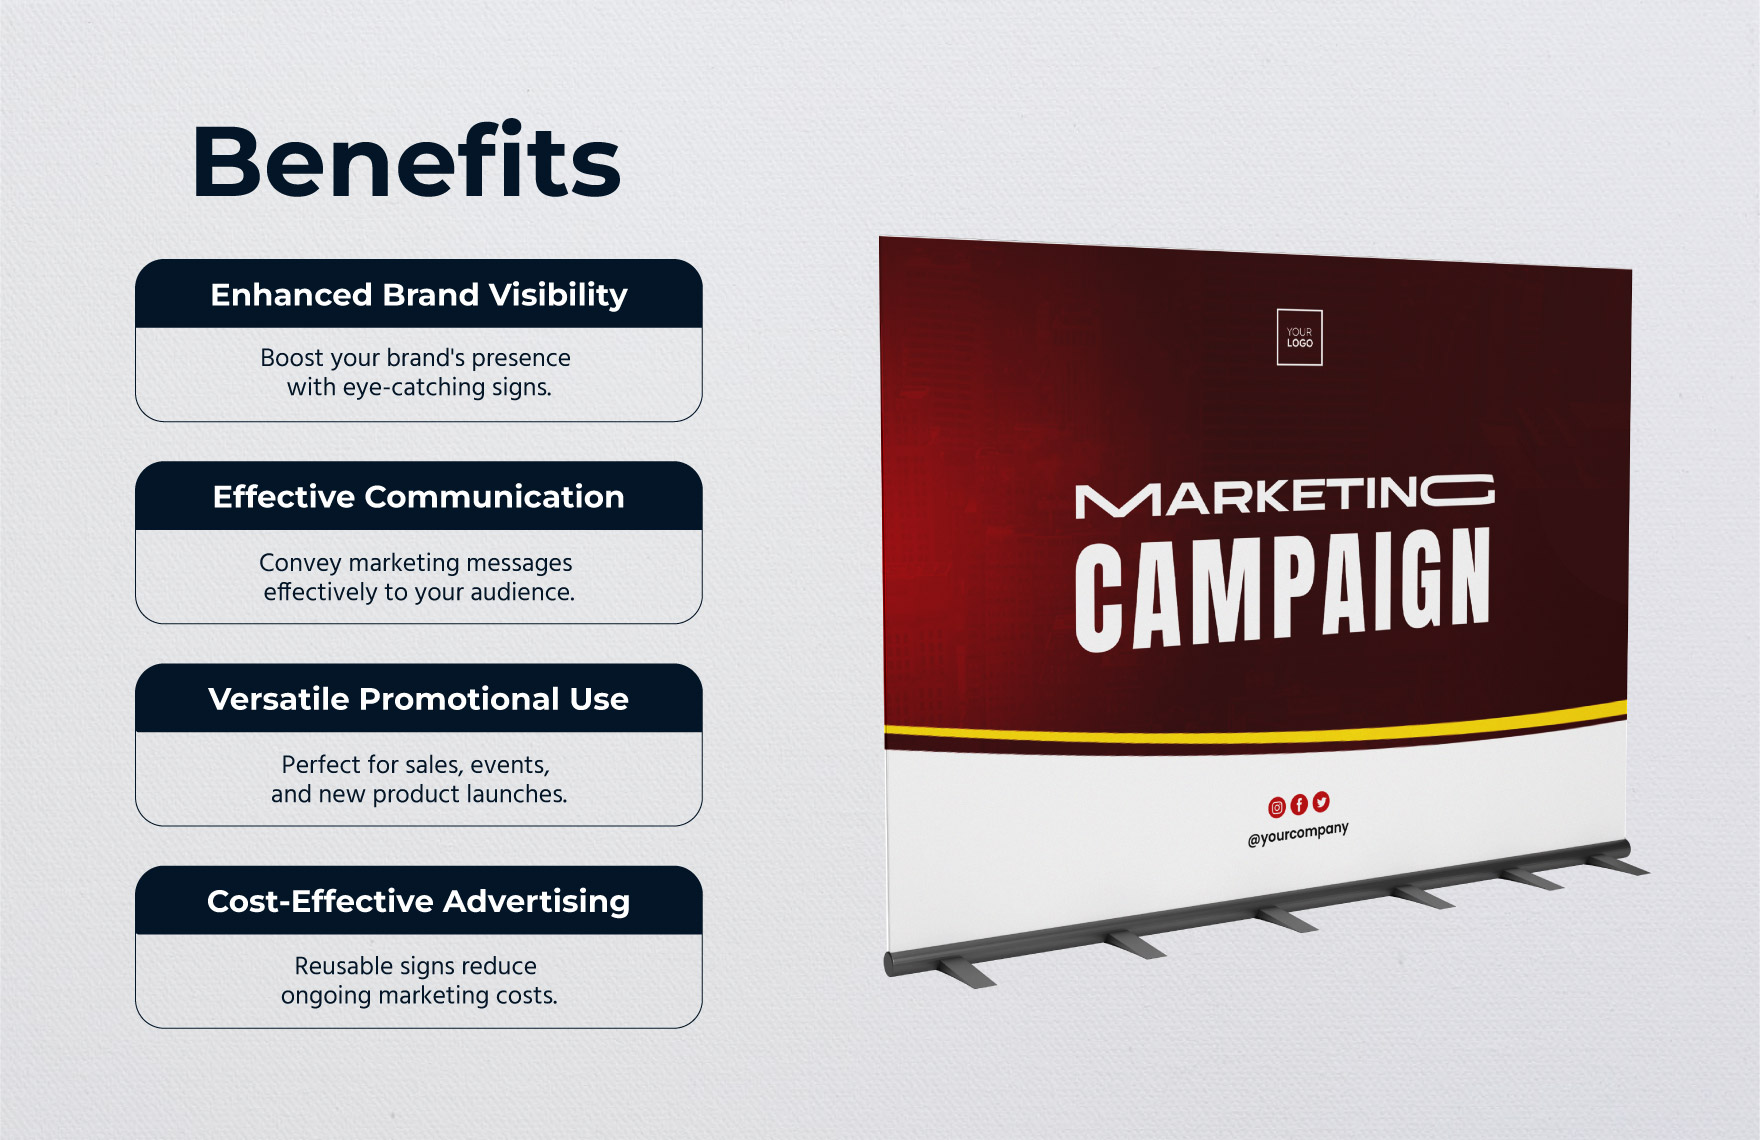 Marketing Campaign Sign Template